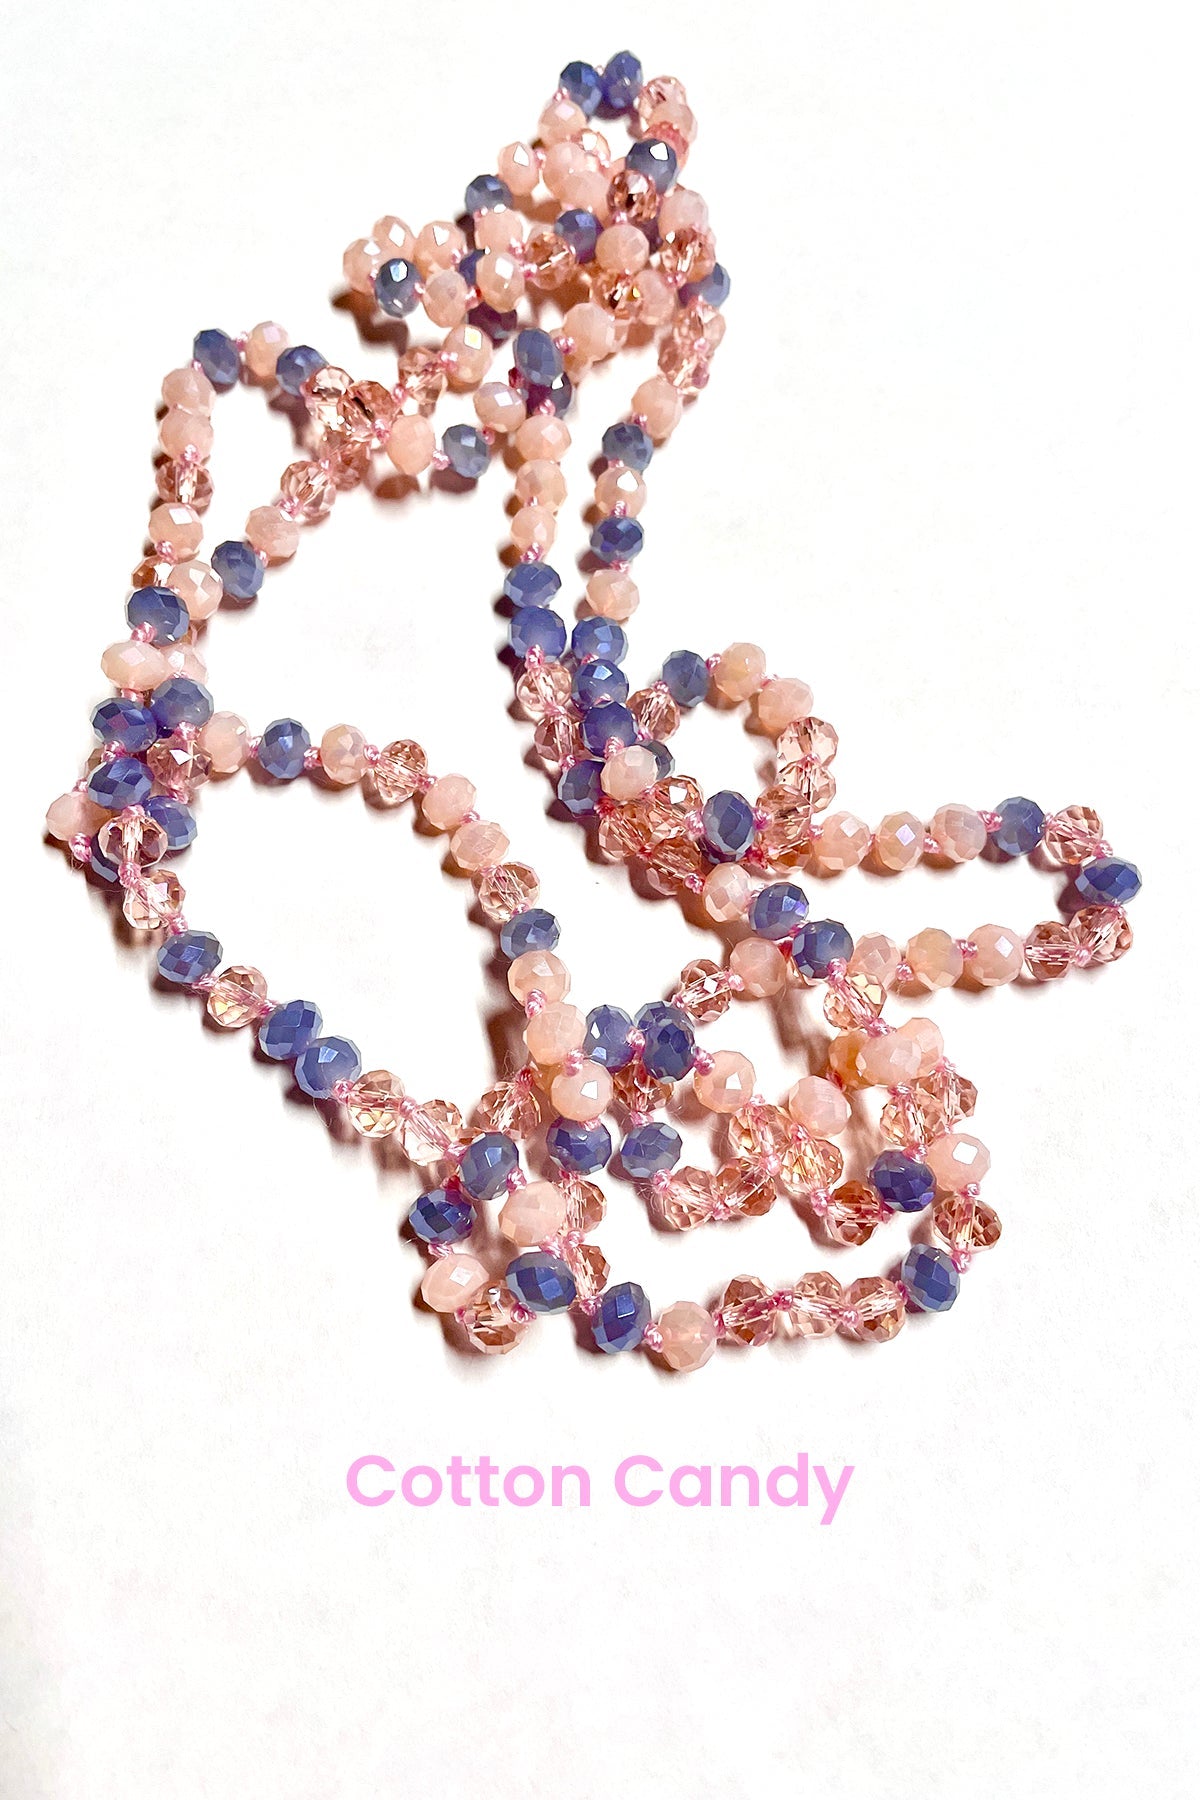 Wrap Necklaces 60" - All Colors jewelry ViVi Liam Jewelry Cotton Candy 